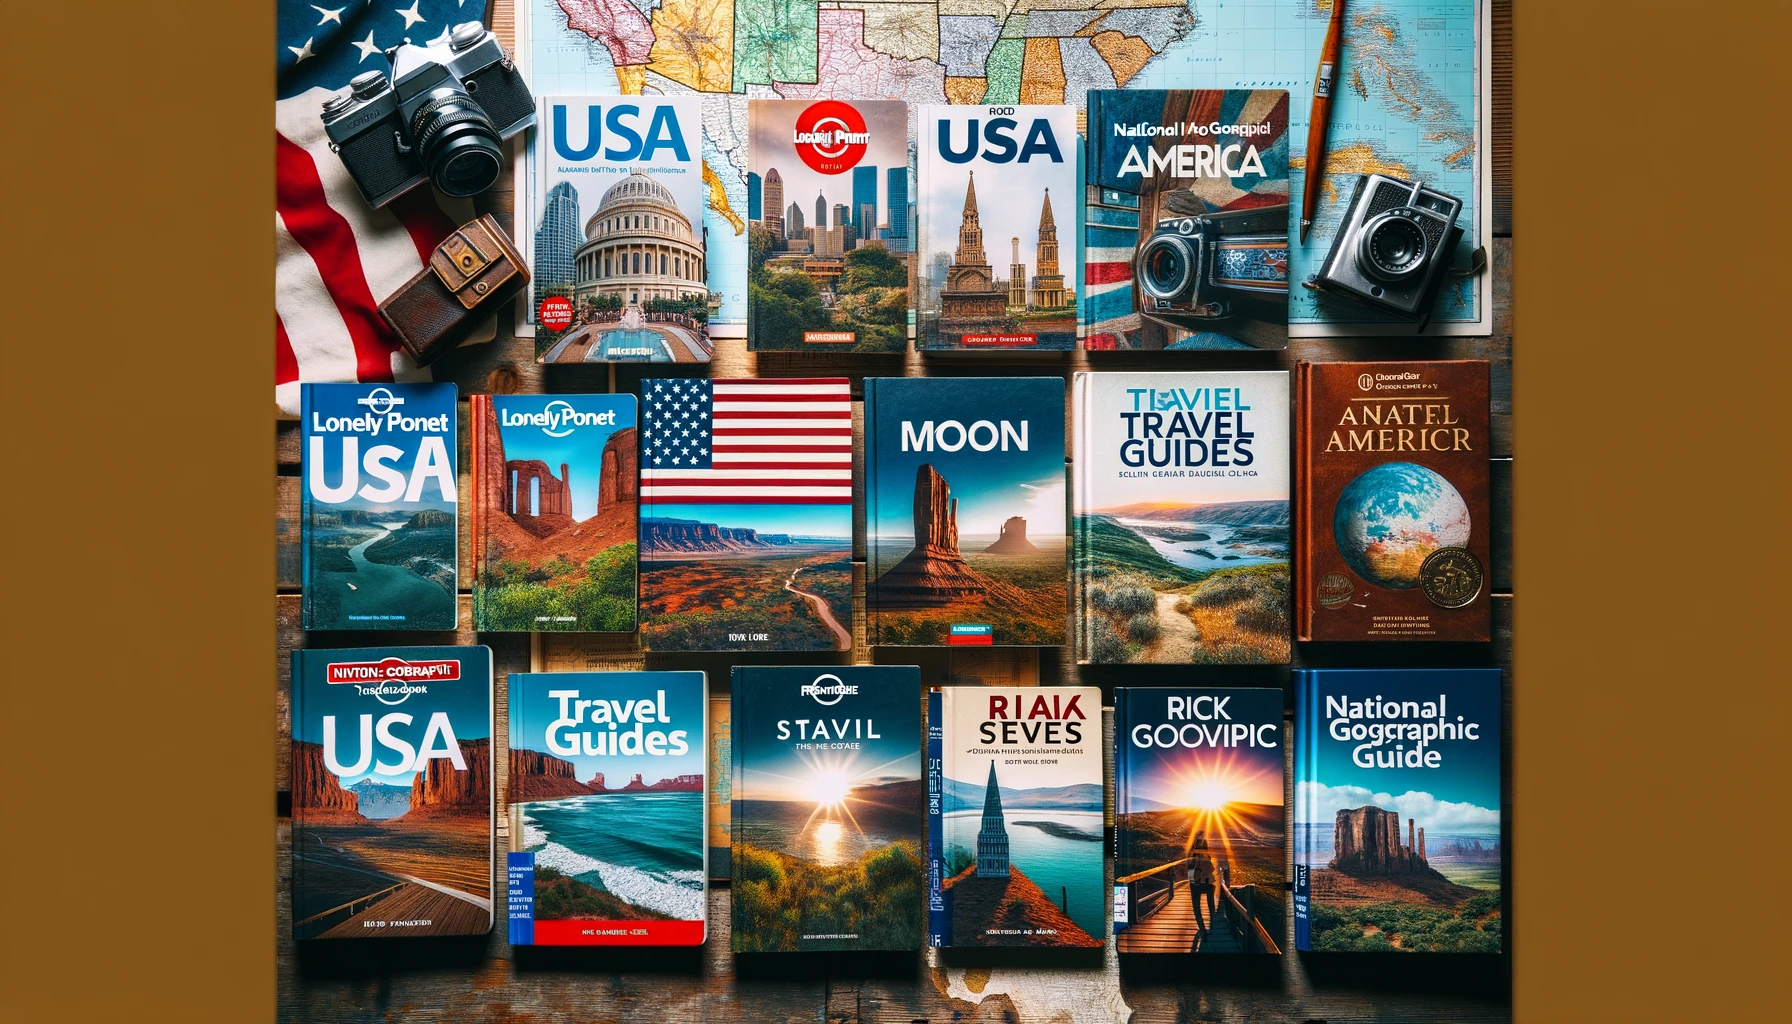 A collection of America's top travel guides, including Lonely Planet USA, Fodor's Travel Guides, Moon Travel Guides, Rick Steves' Guidebooks, and National Geographic Travel Guides, arranged on a wooden table with a map of the USA and a vintage camera.